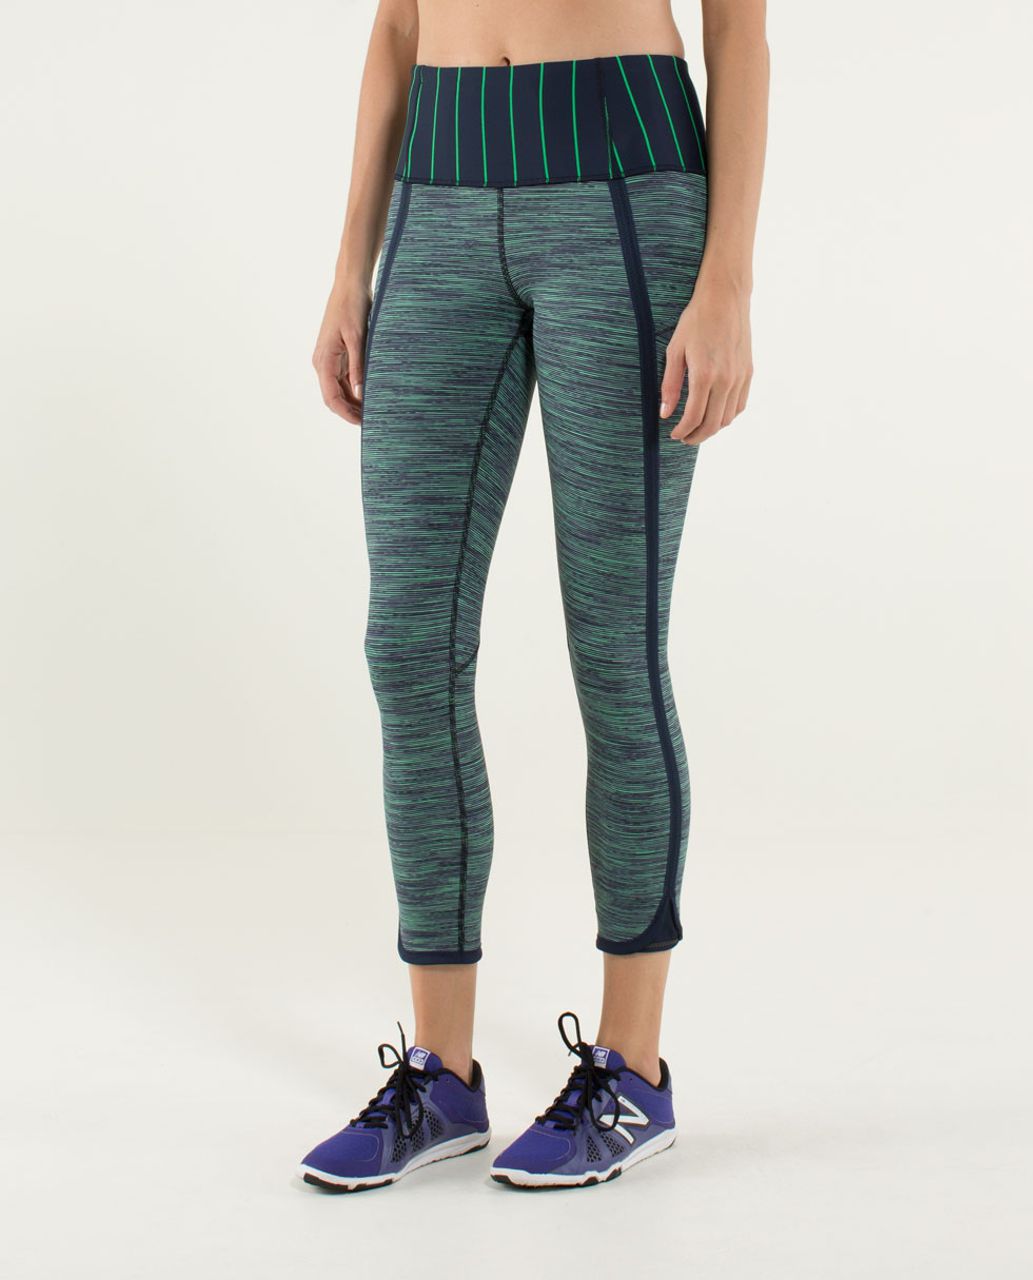 Lululemon Can't Stop Crop - Wee Are From Space Green Bean / Slalom Stripe Inkwell / Inkwell